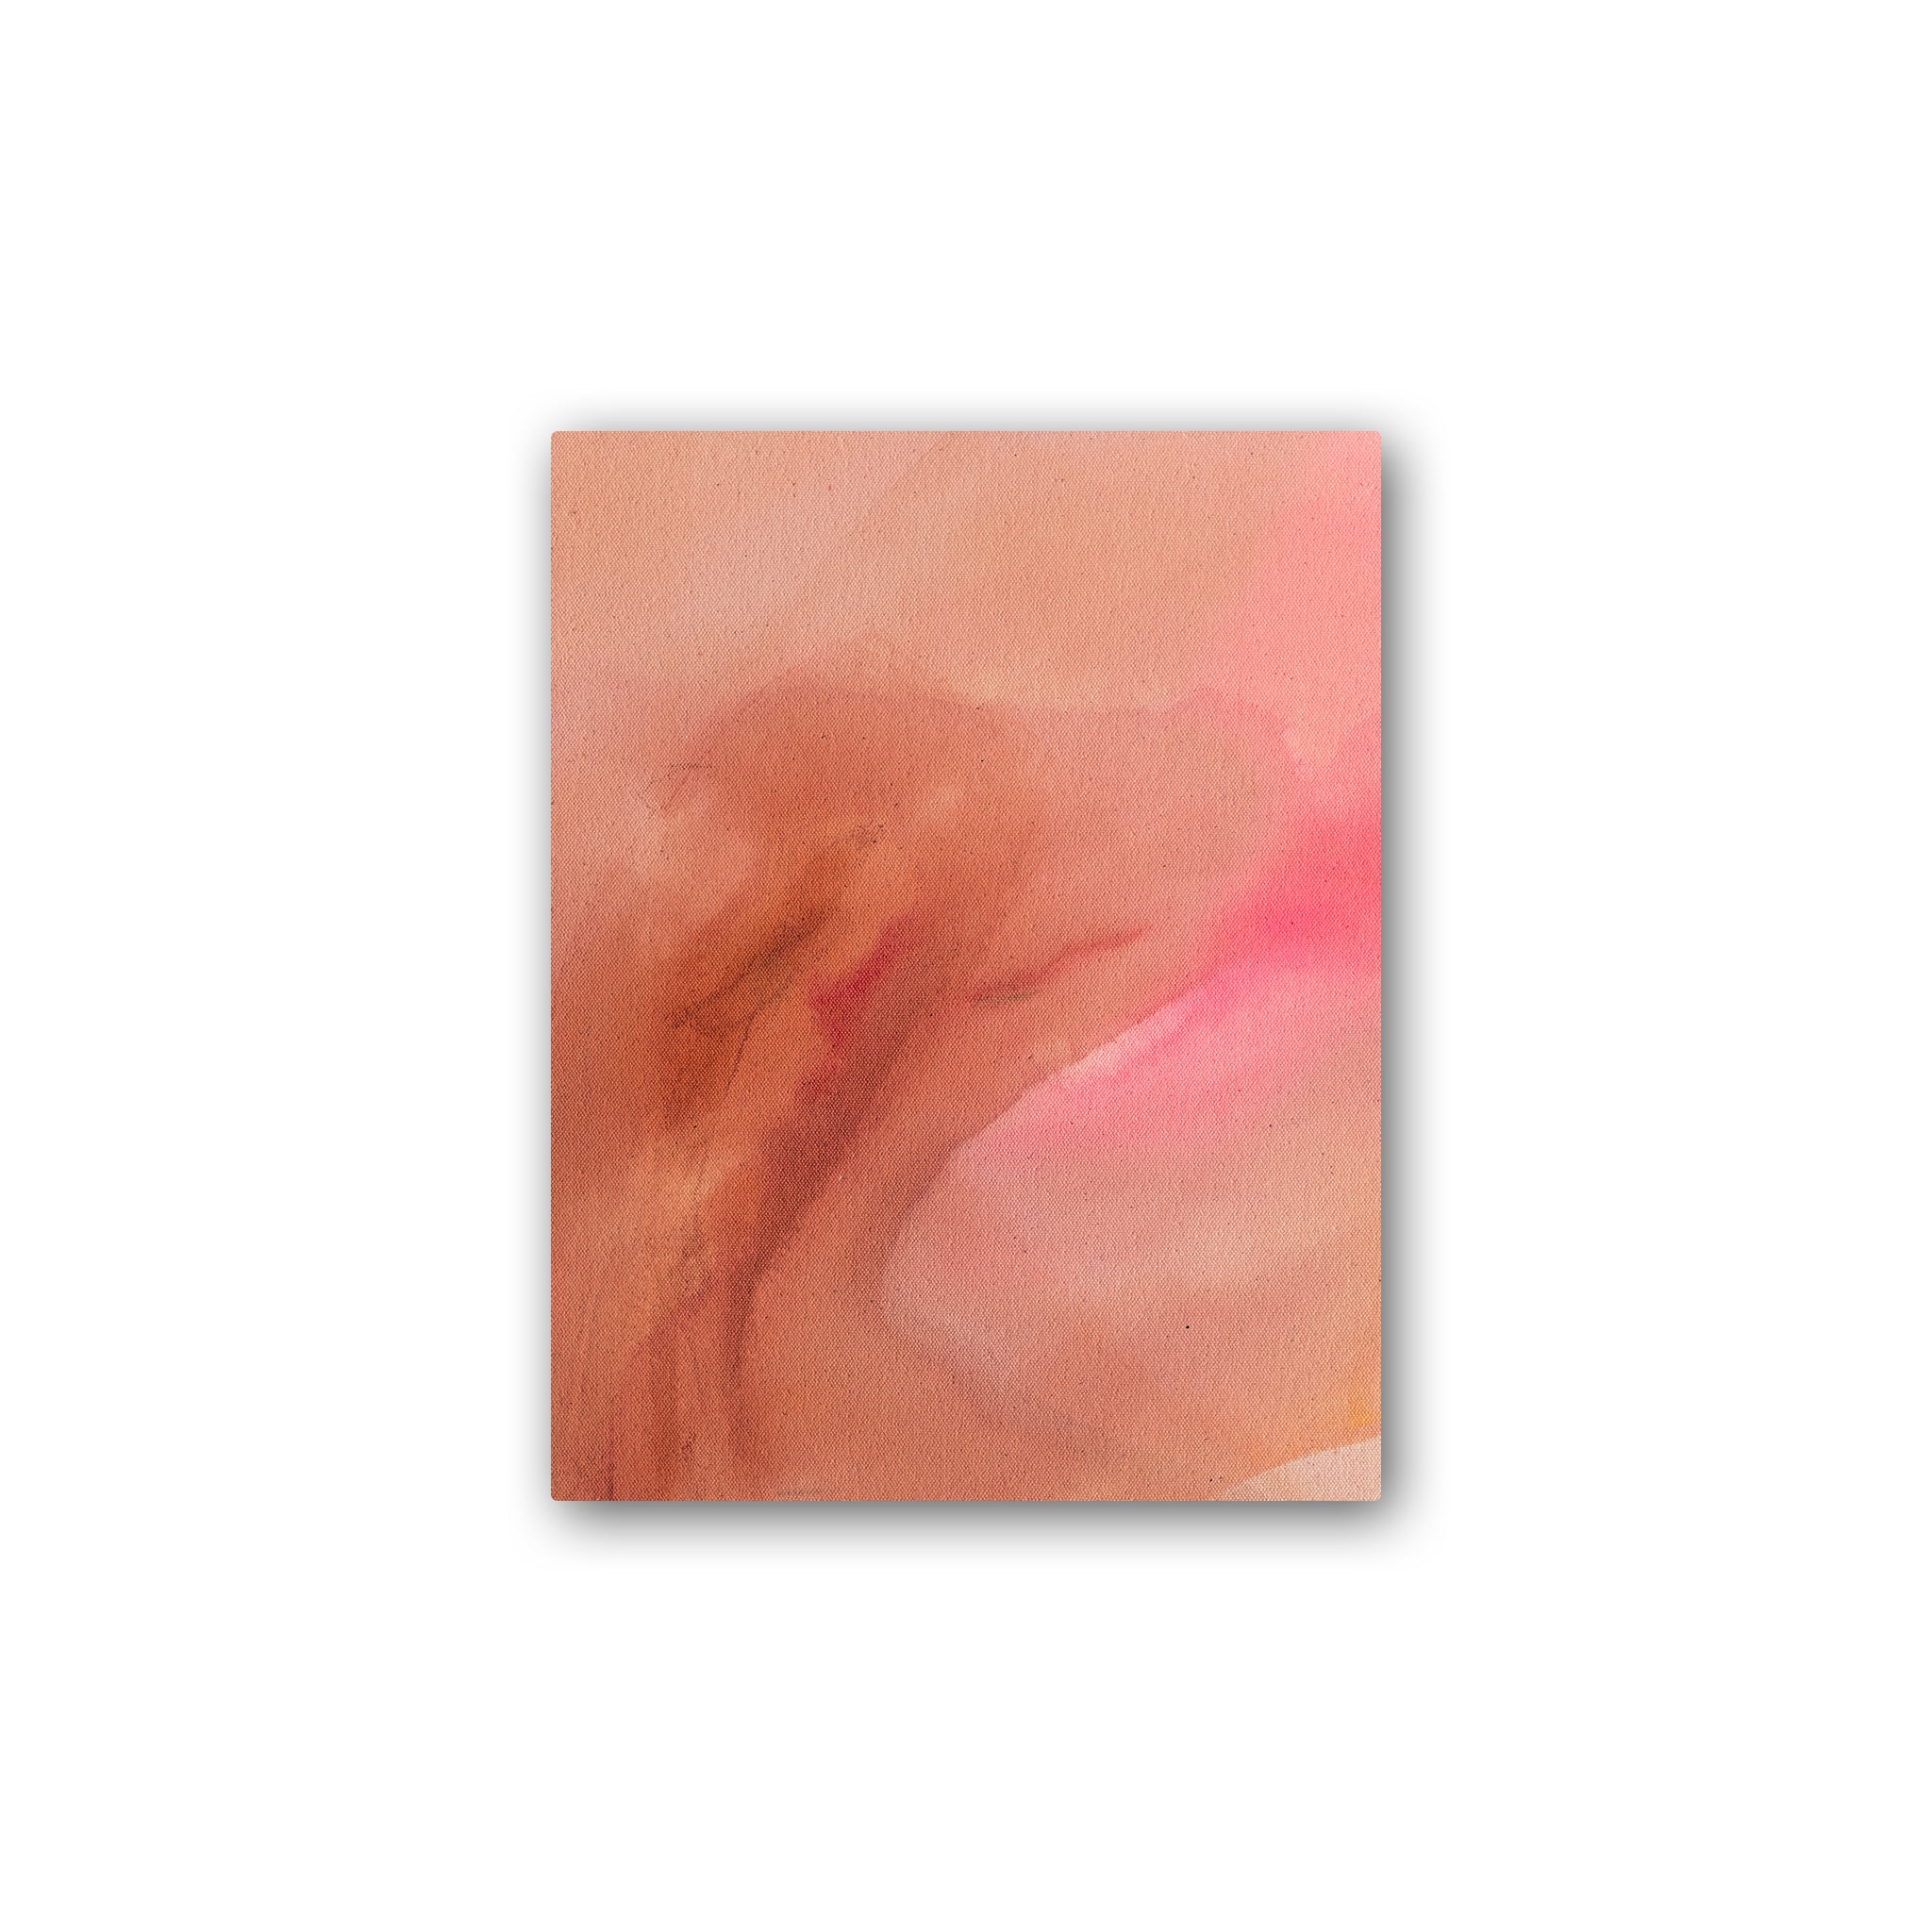 A small abstract painting made with swirling washes of pink and orange paint and pencil markings.